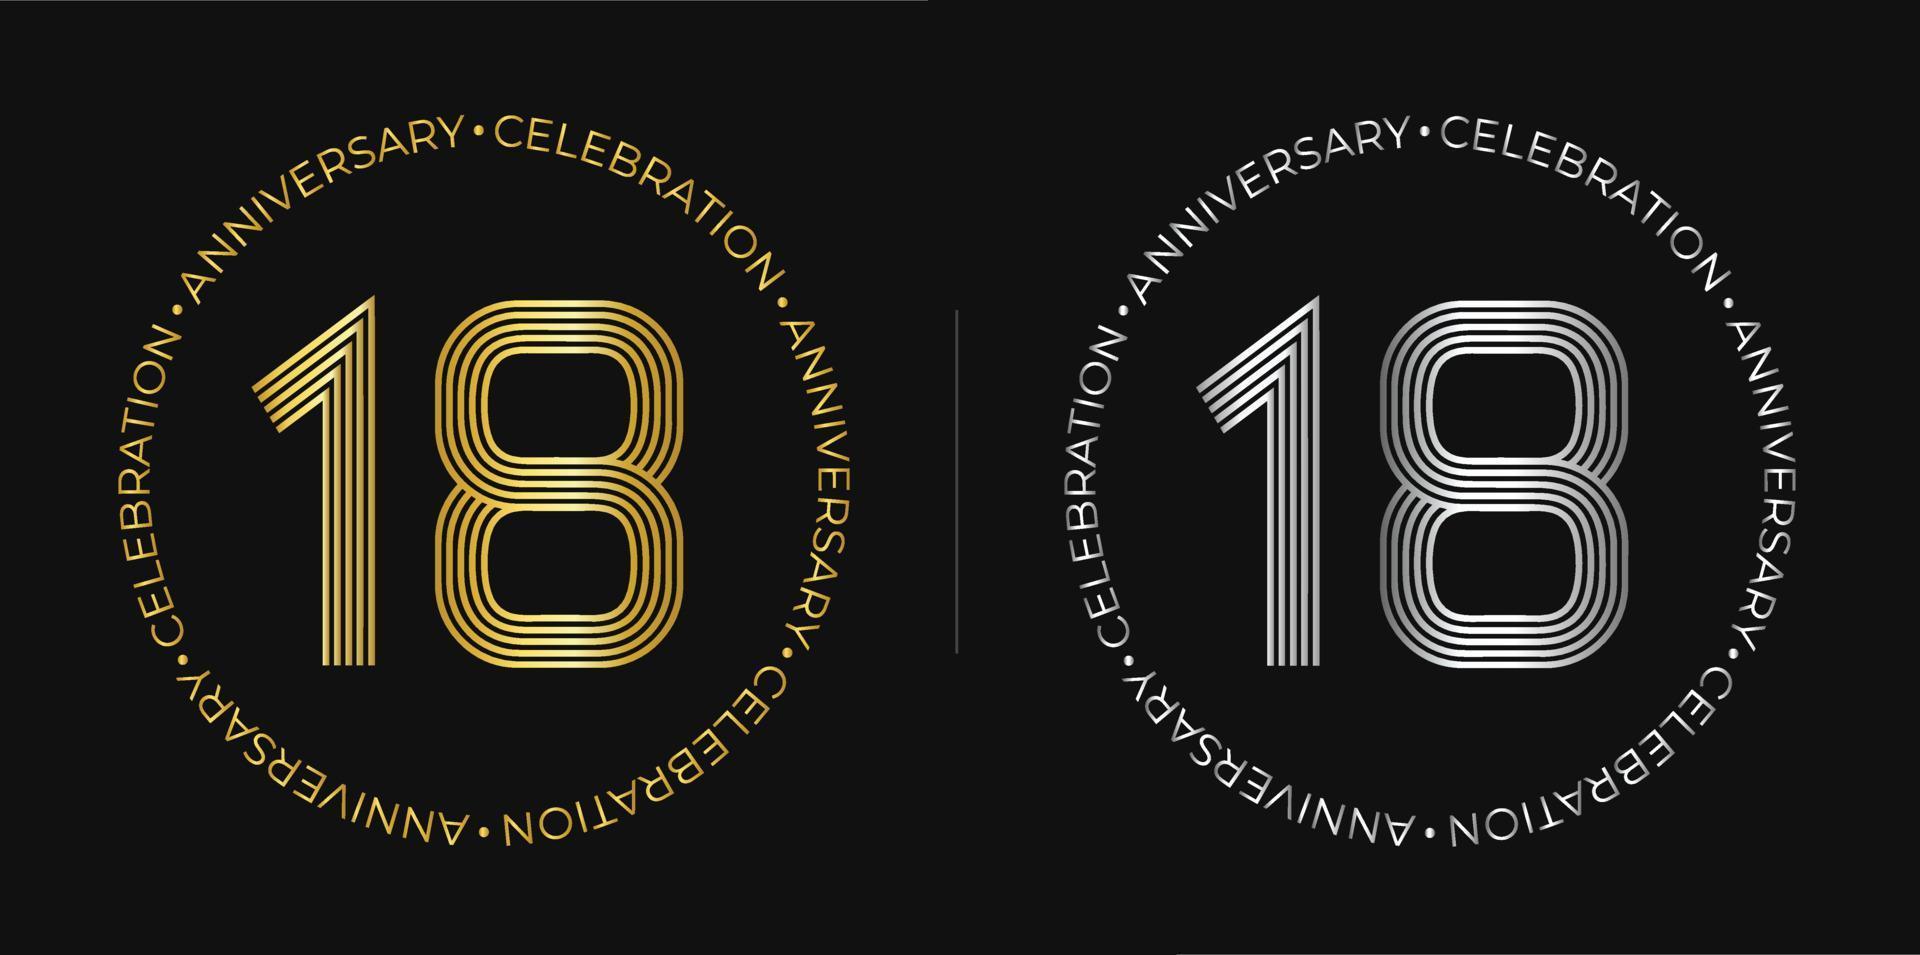 18th birthday. Eighteen years anniversary celebration banner in golden and silver colors. Circular logo with original numbers design in elegant lines. vector